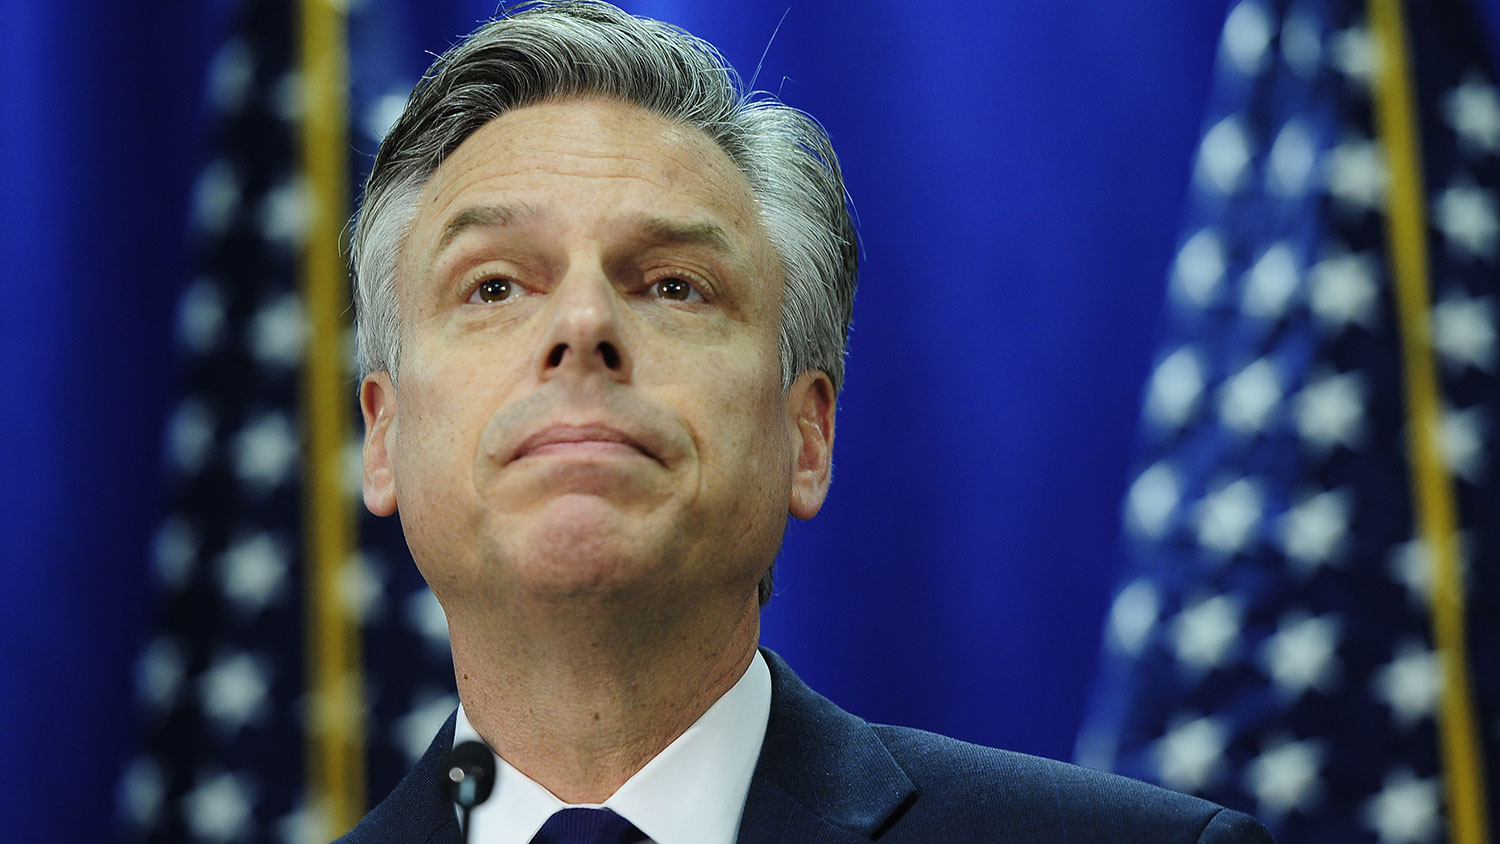 Republican presidential candidate Jon Huntsman announces he is dropping out in Myrtle Beach, South Carolina, on Jan. 16, 2012.
